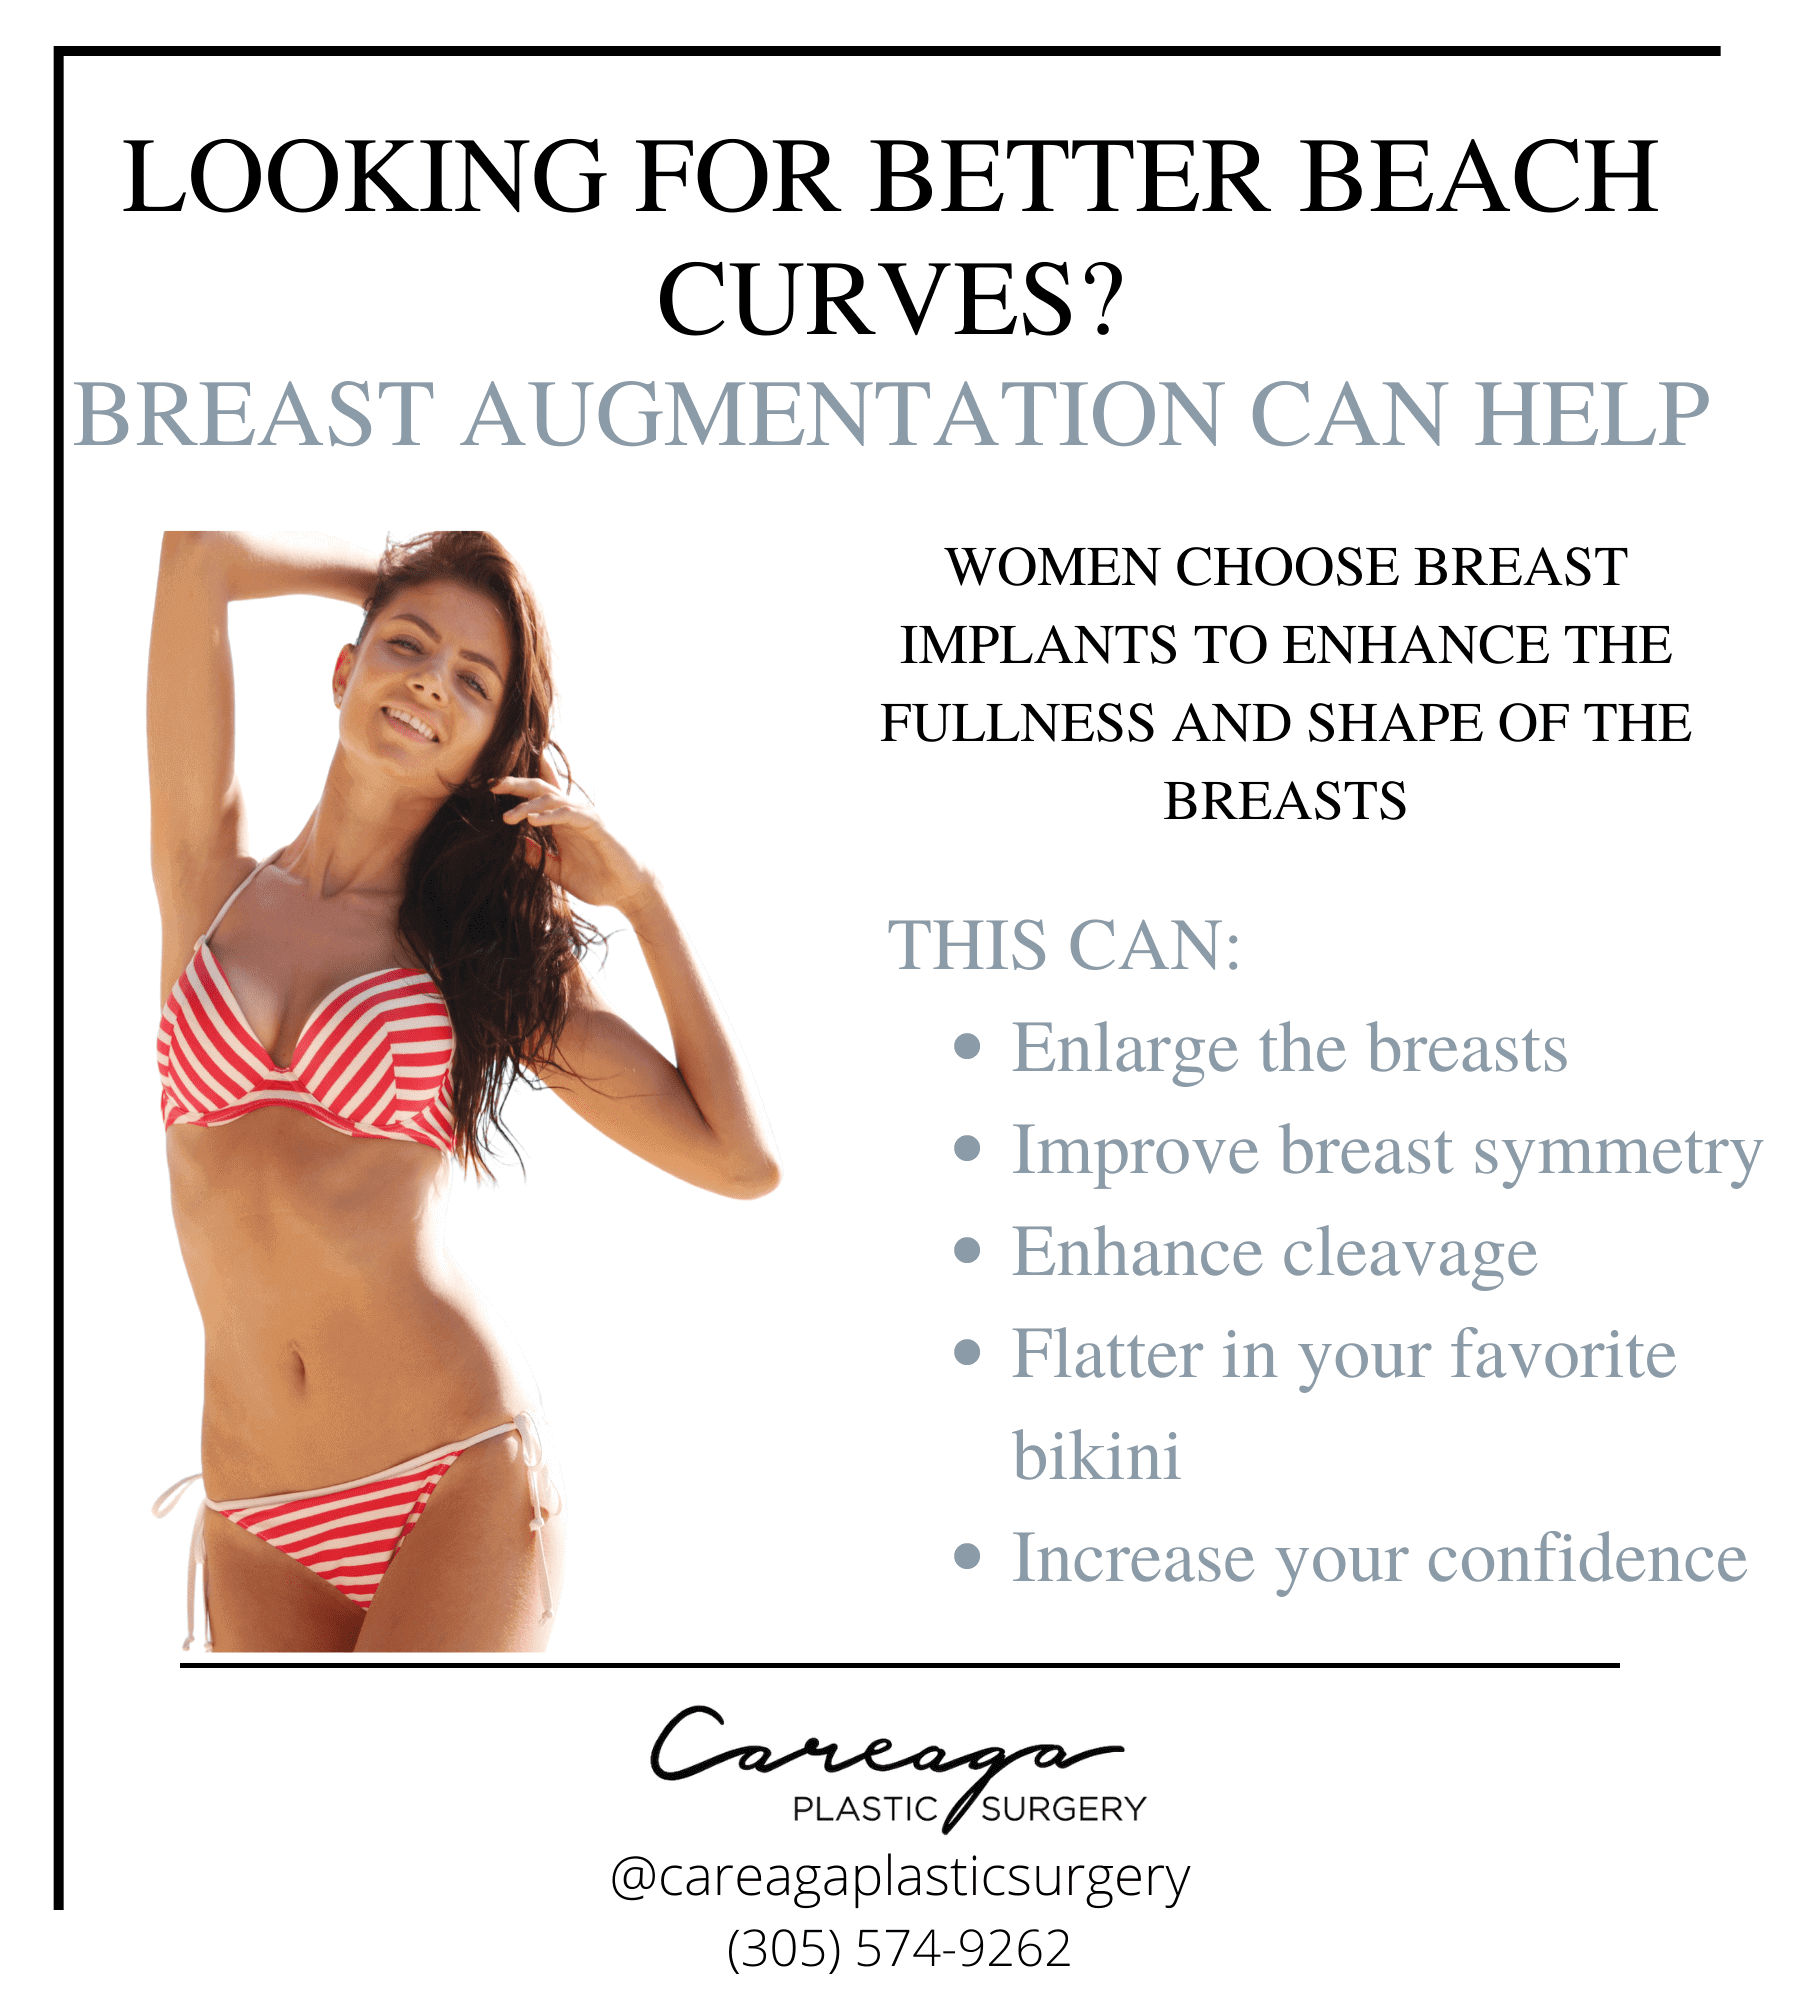 Get Ready to Show Off Your Curves With Breast Augmentation in Miami